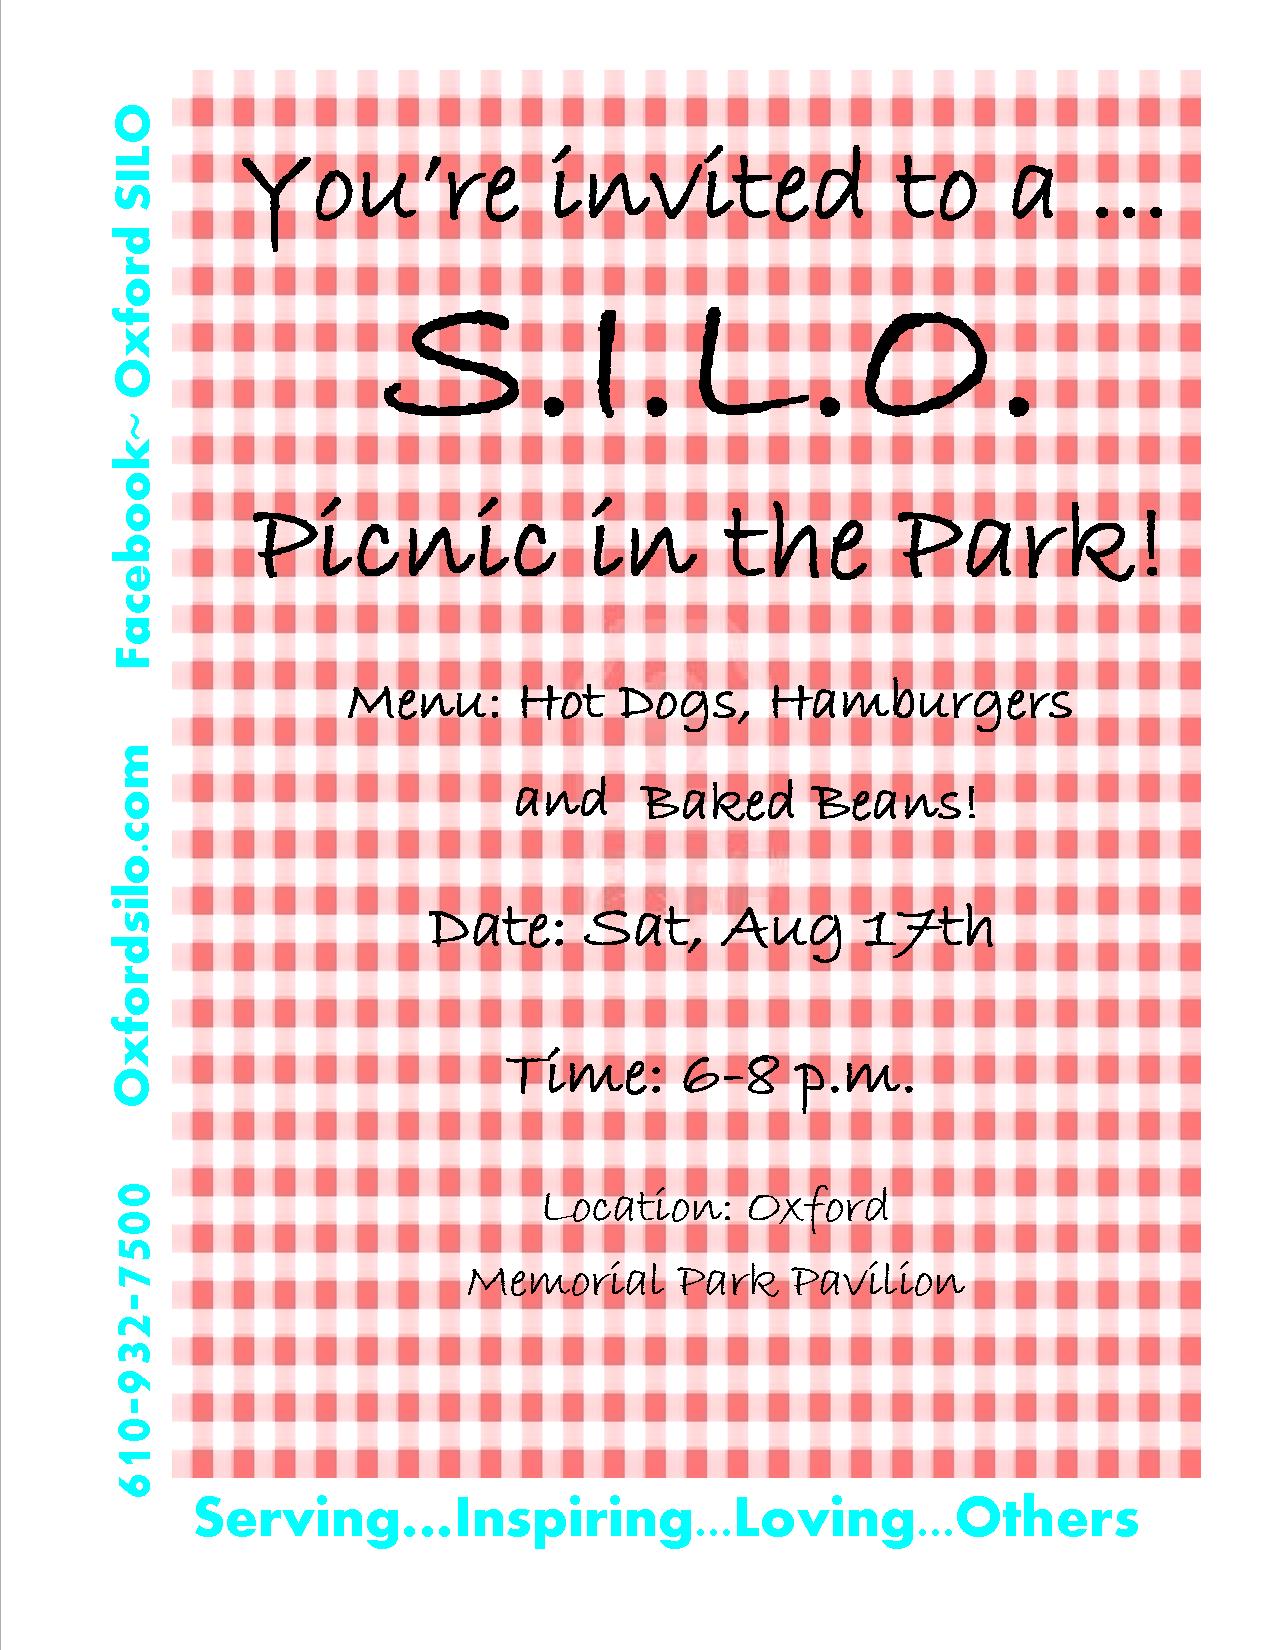 Picnic in the Park, August 17th, 6-8pm, Oxford Memorial Park